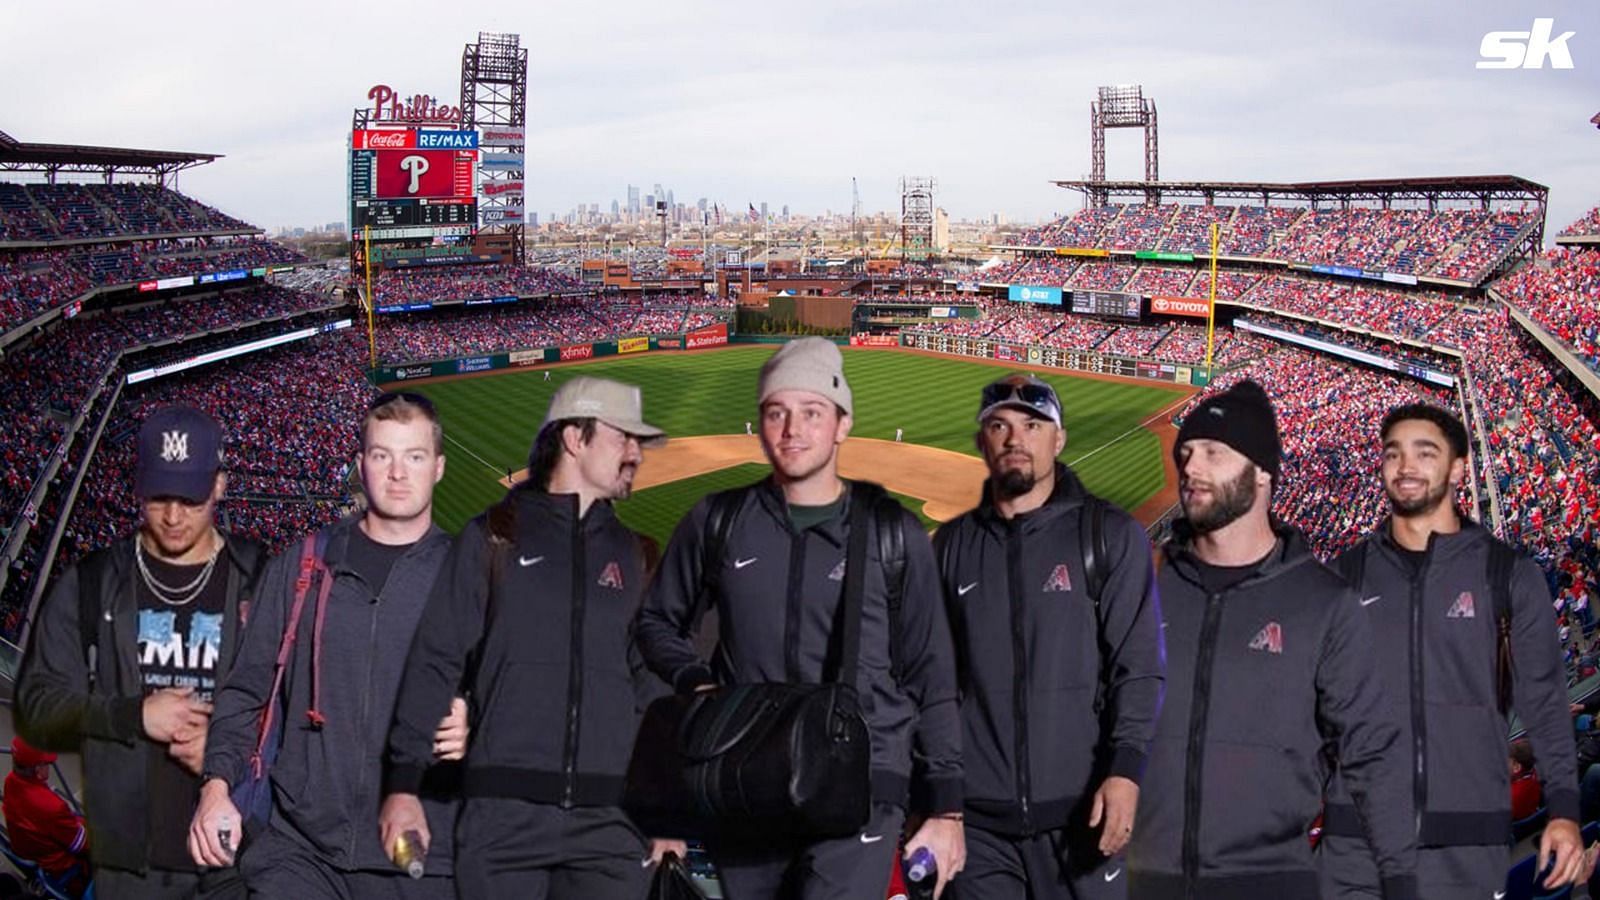 Fans react to D-backs pulling up like gangsters in matching sweatsuits only to go on and lose to Phillies